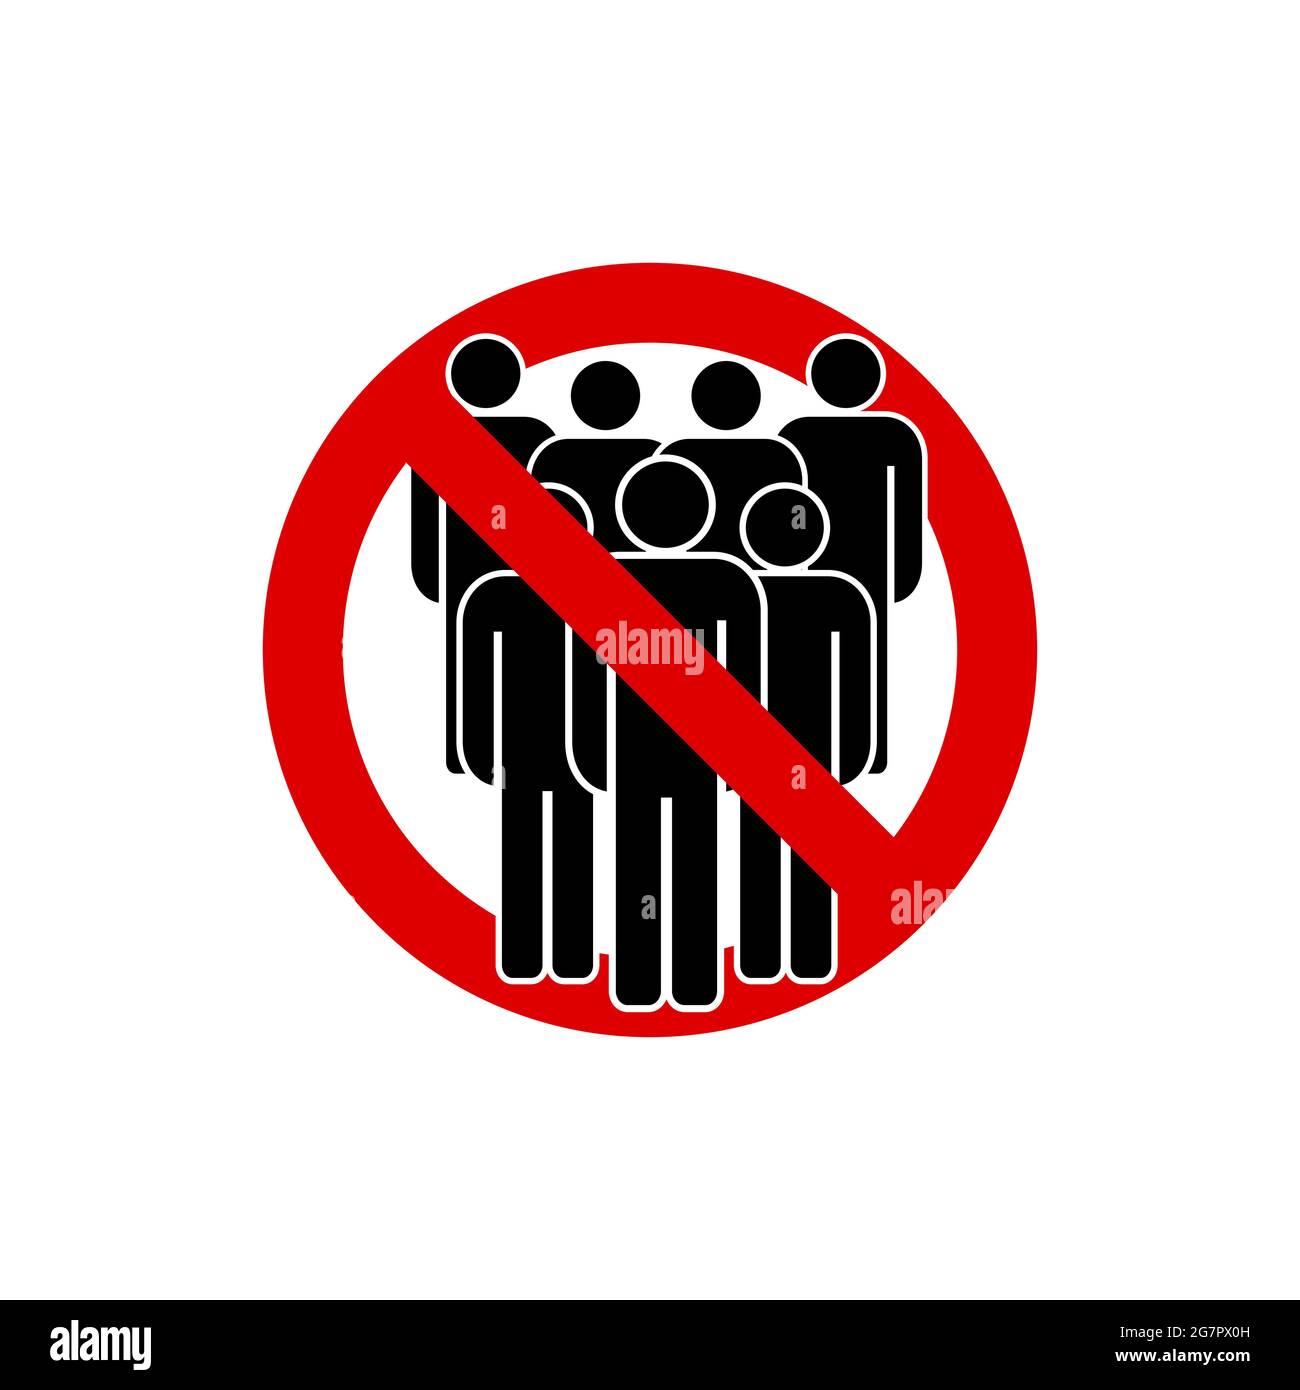 No crowd icon. Quarantine prohibition sign. Public access restriction. Persons symbol isolated. Vector illustration. Stock Vector